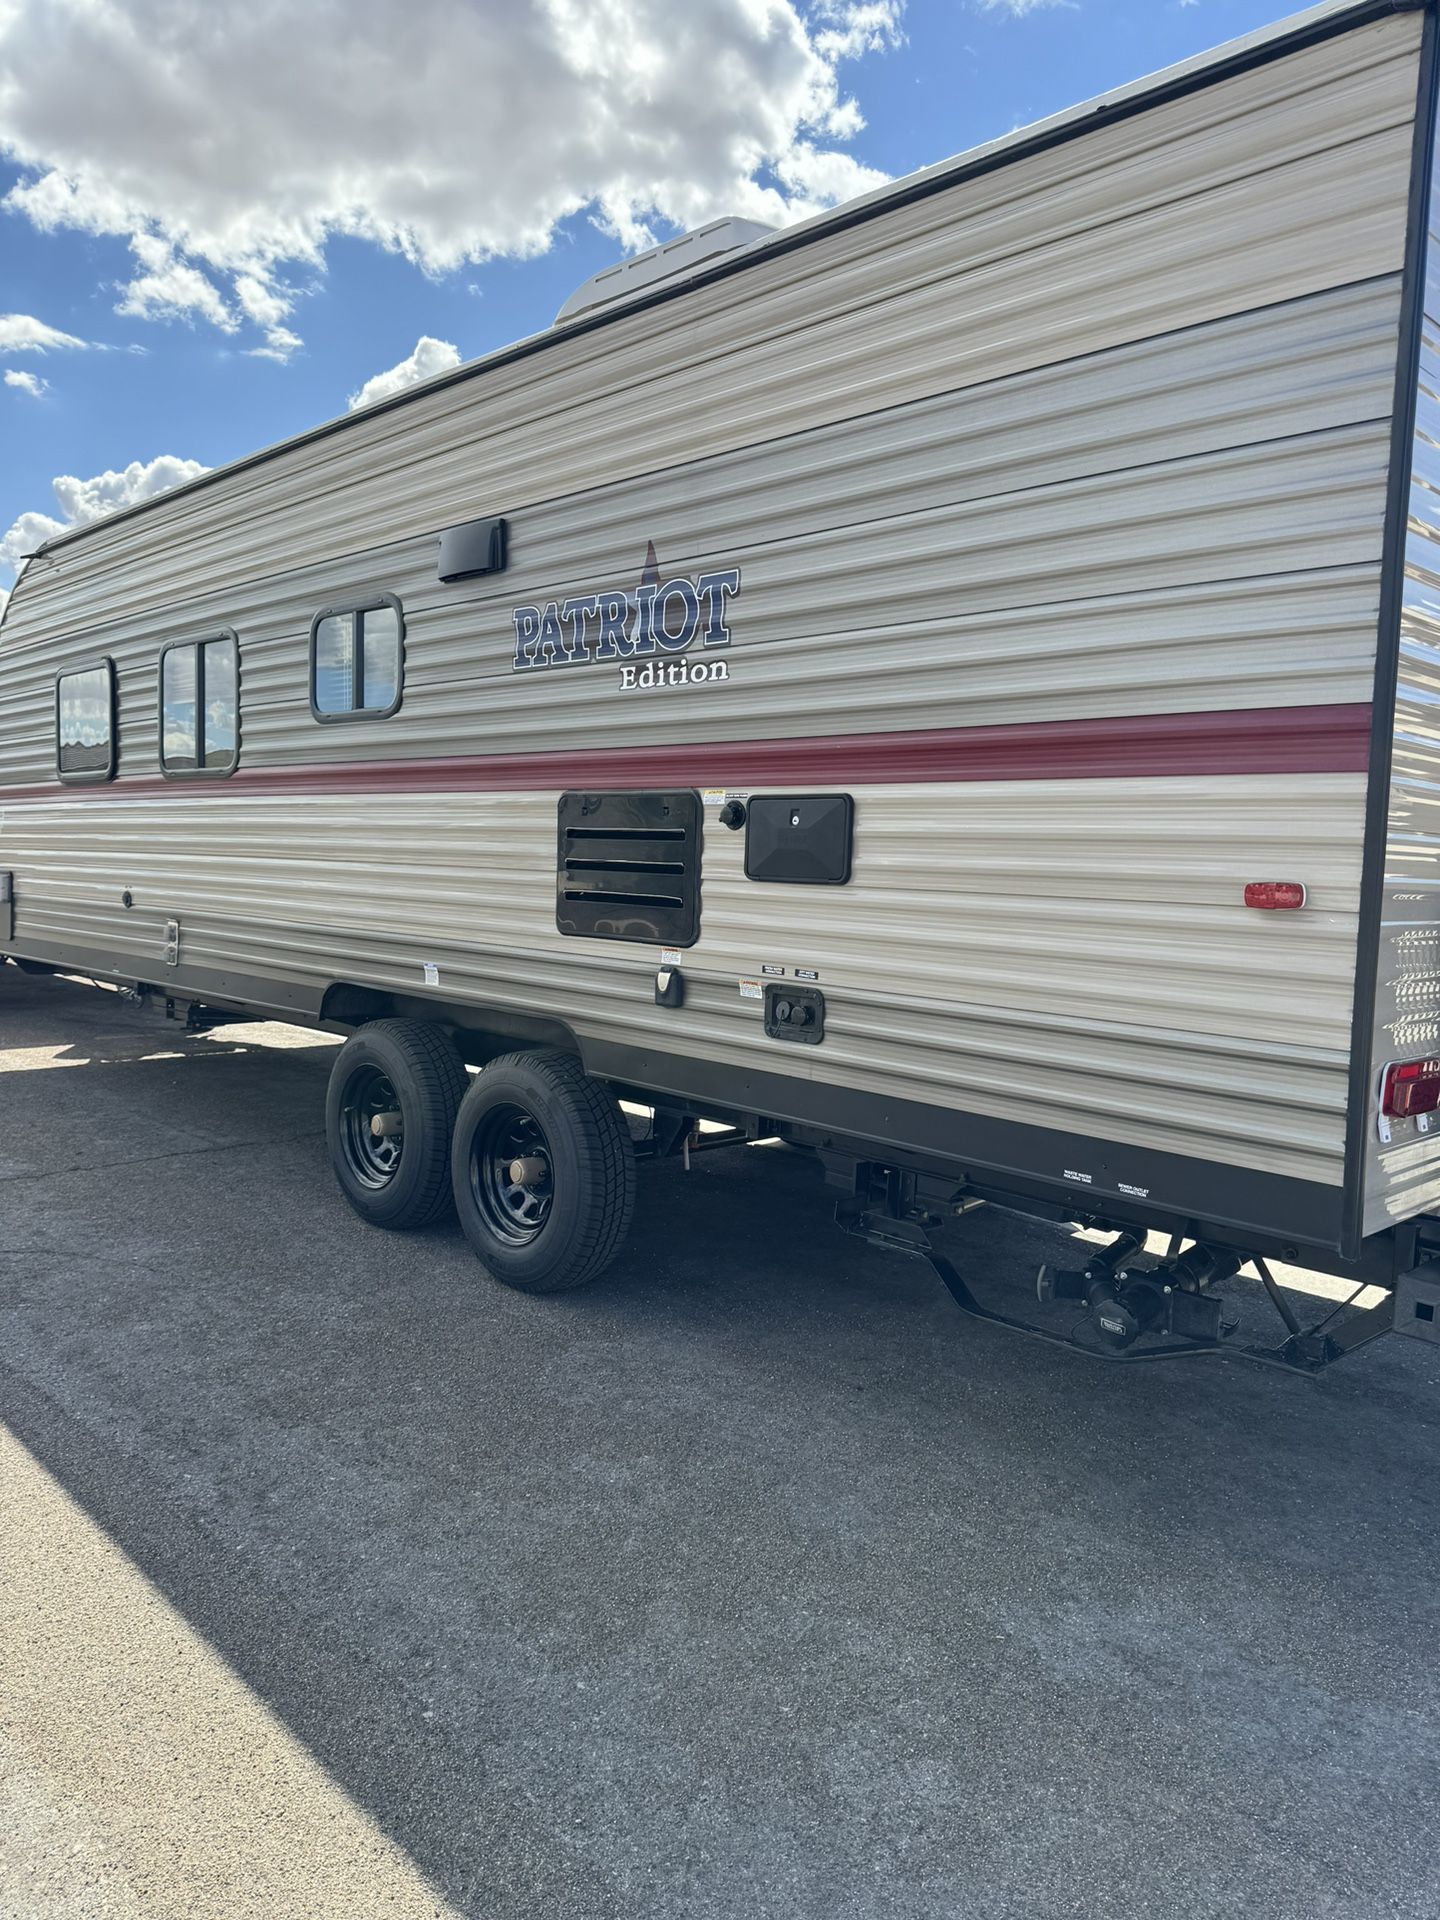 2o18 Patriot Travel Trailer Camping Weekends